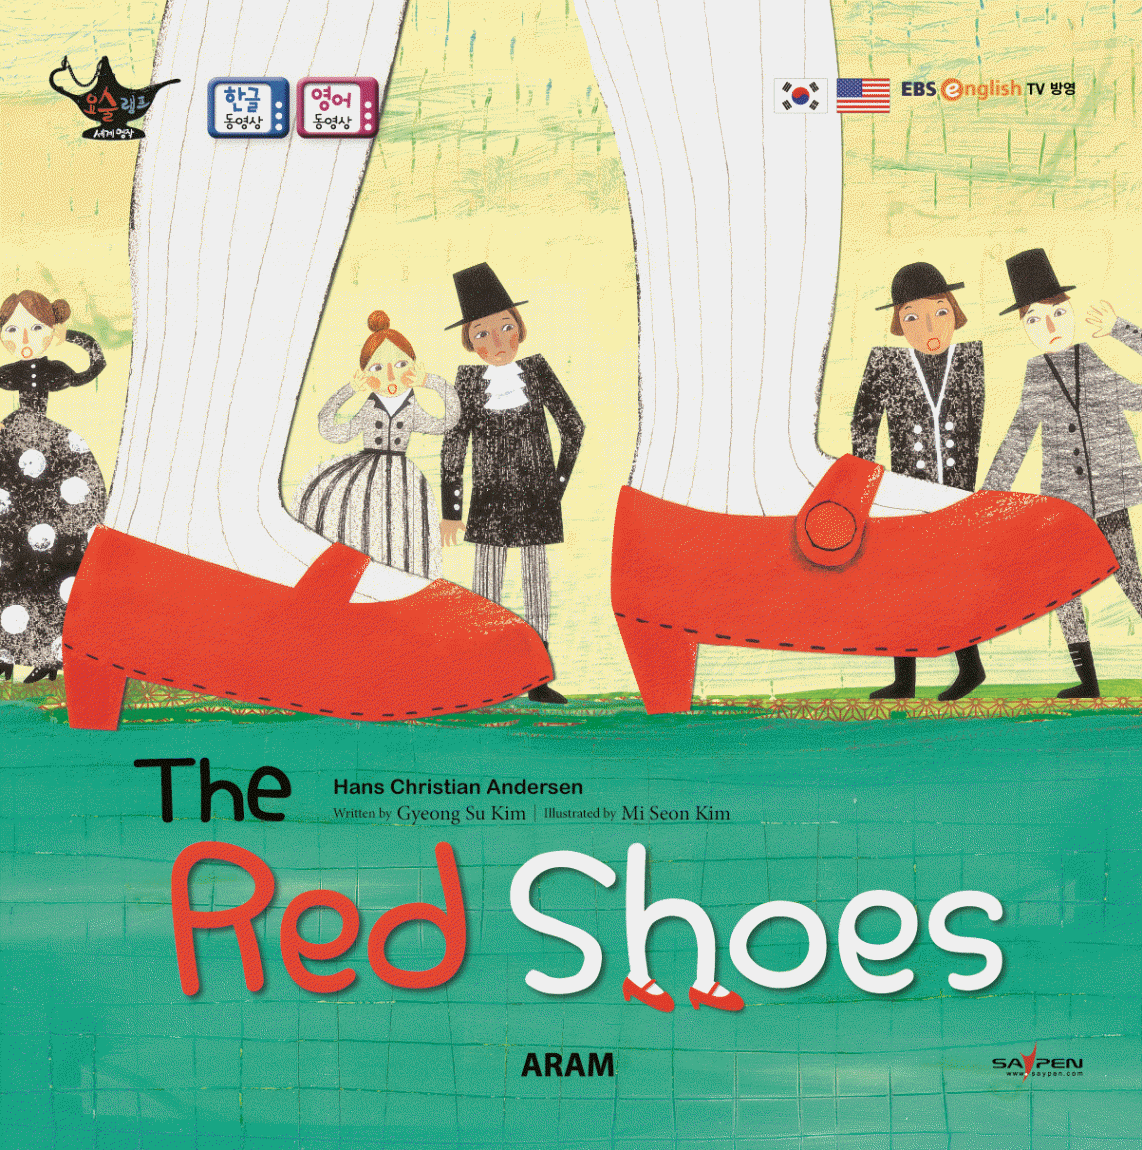 (The) red shoes